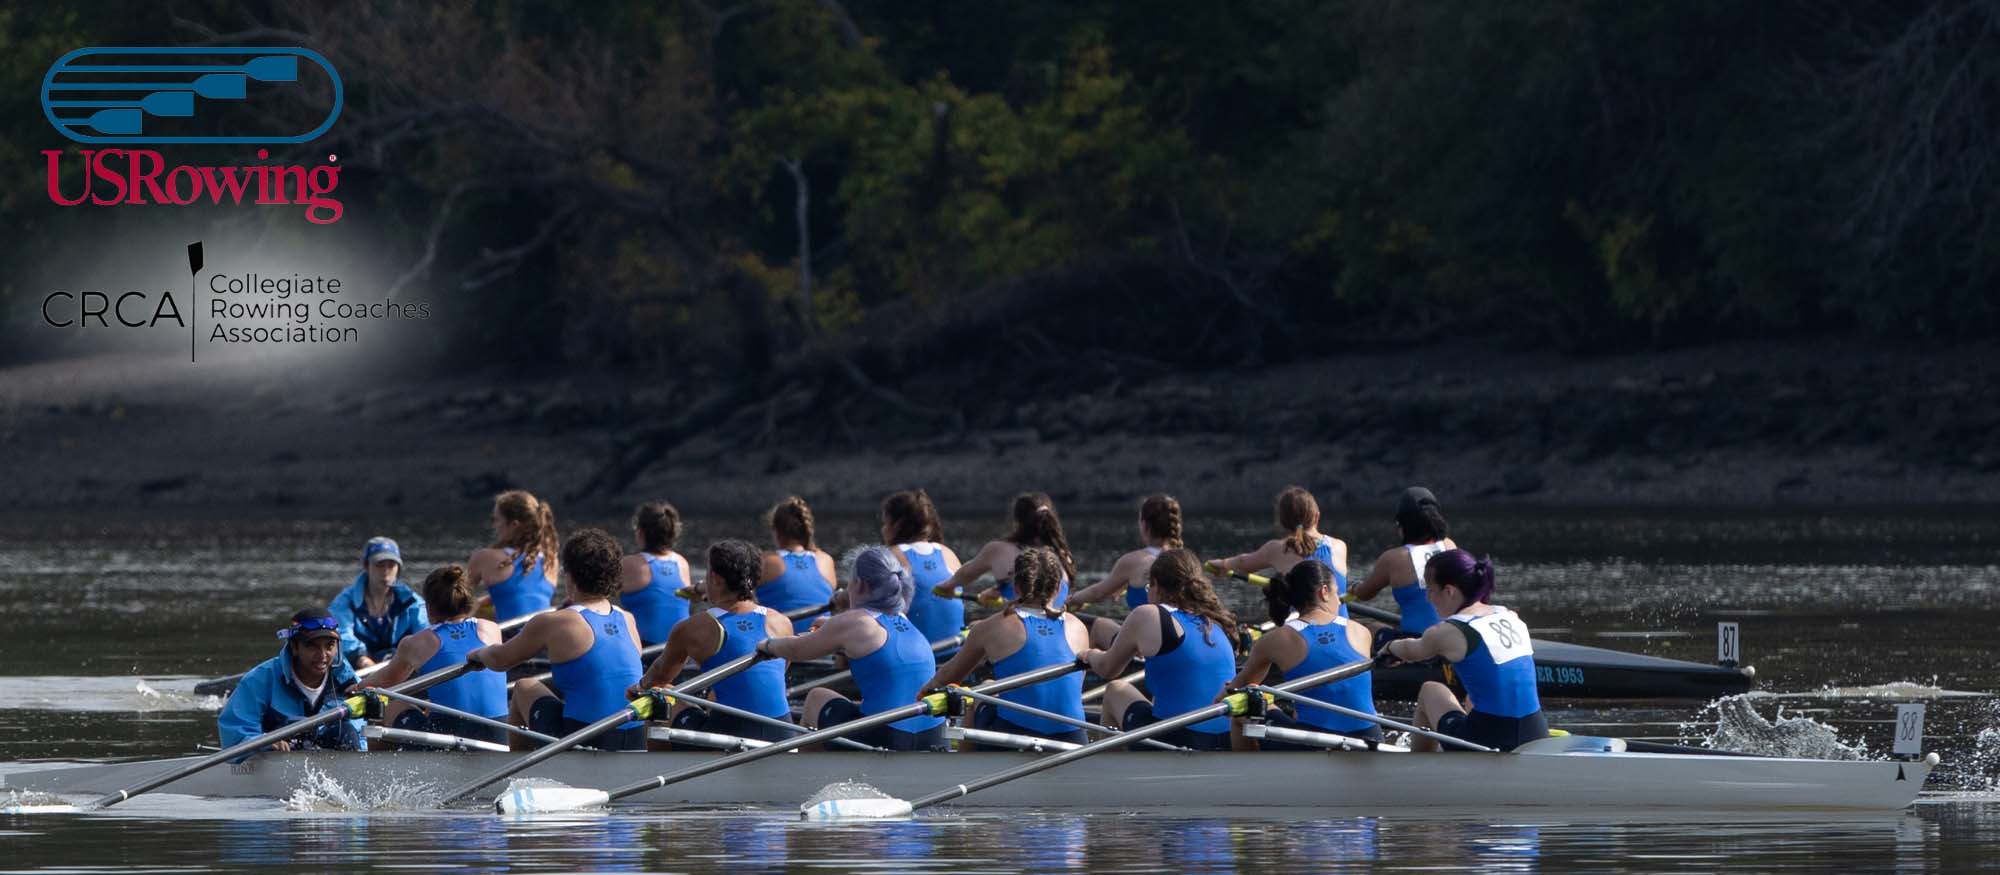 Rowing Ties for 12th in 2022 USRowing/CRCA Preseason Coaches Poll